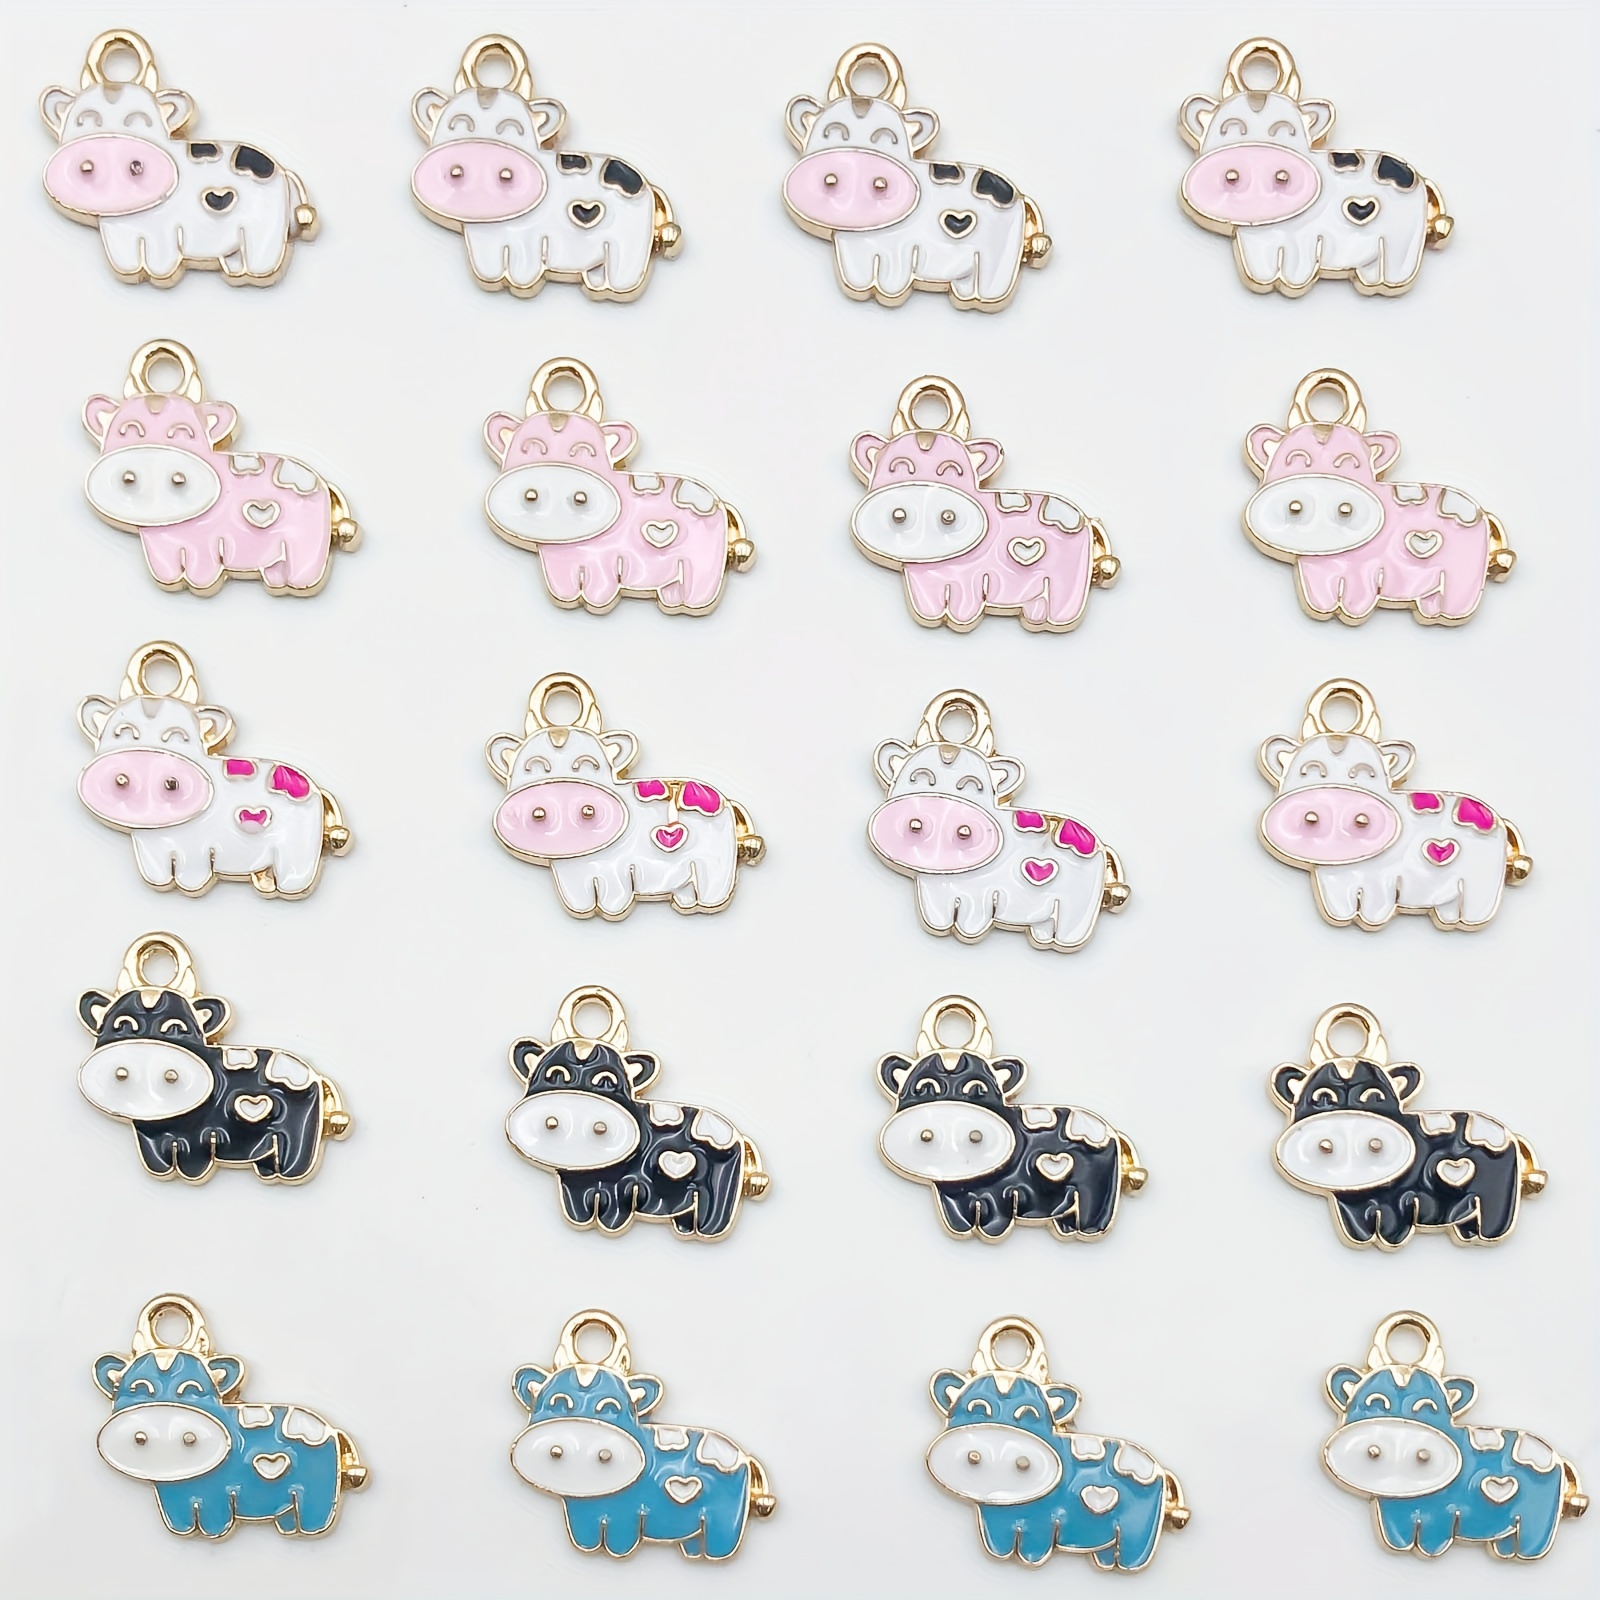 60 Pieces Cow Charms Colorful Animal Metal Charms DIY Cute Cow Enamel Pendants Cow Alloy Charms for Earring Necklace Bracelet Key Chain Jewelry